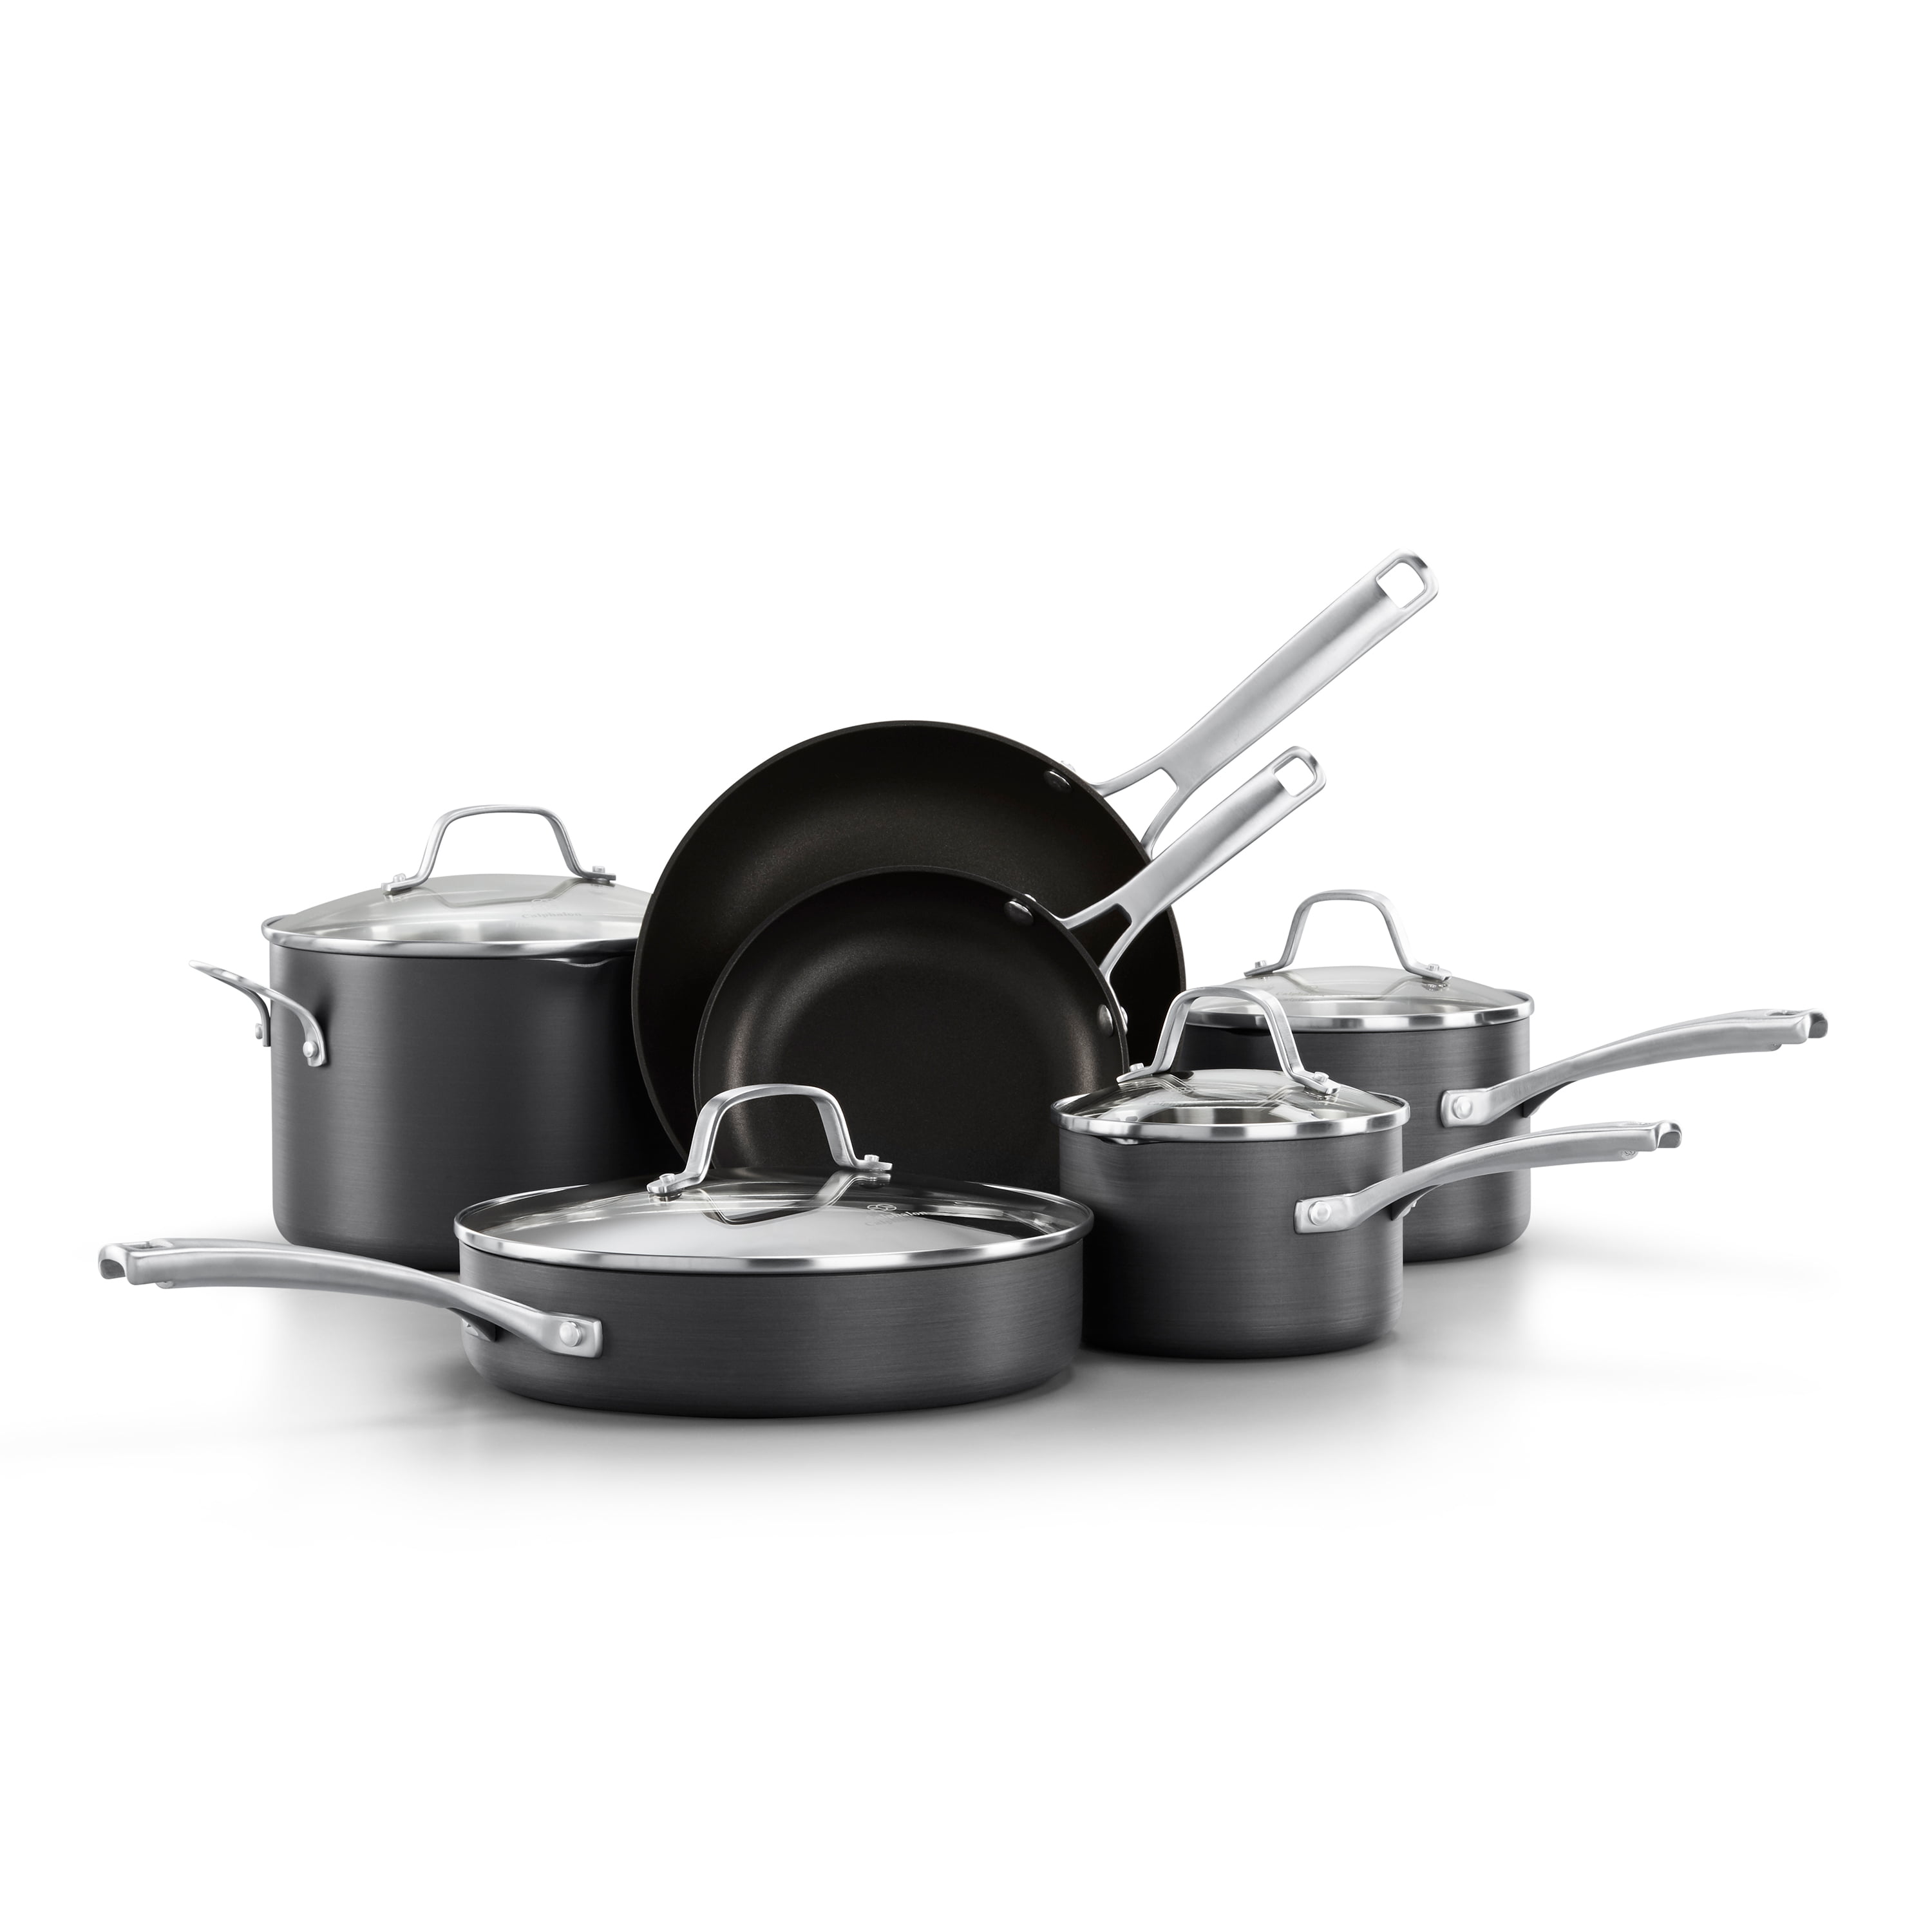 14-Piece Cookware Set Select by Calphalon Hard-Anodized Nonstick Pots and Pans 